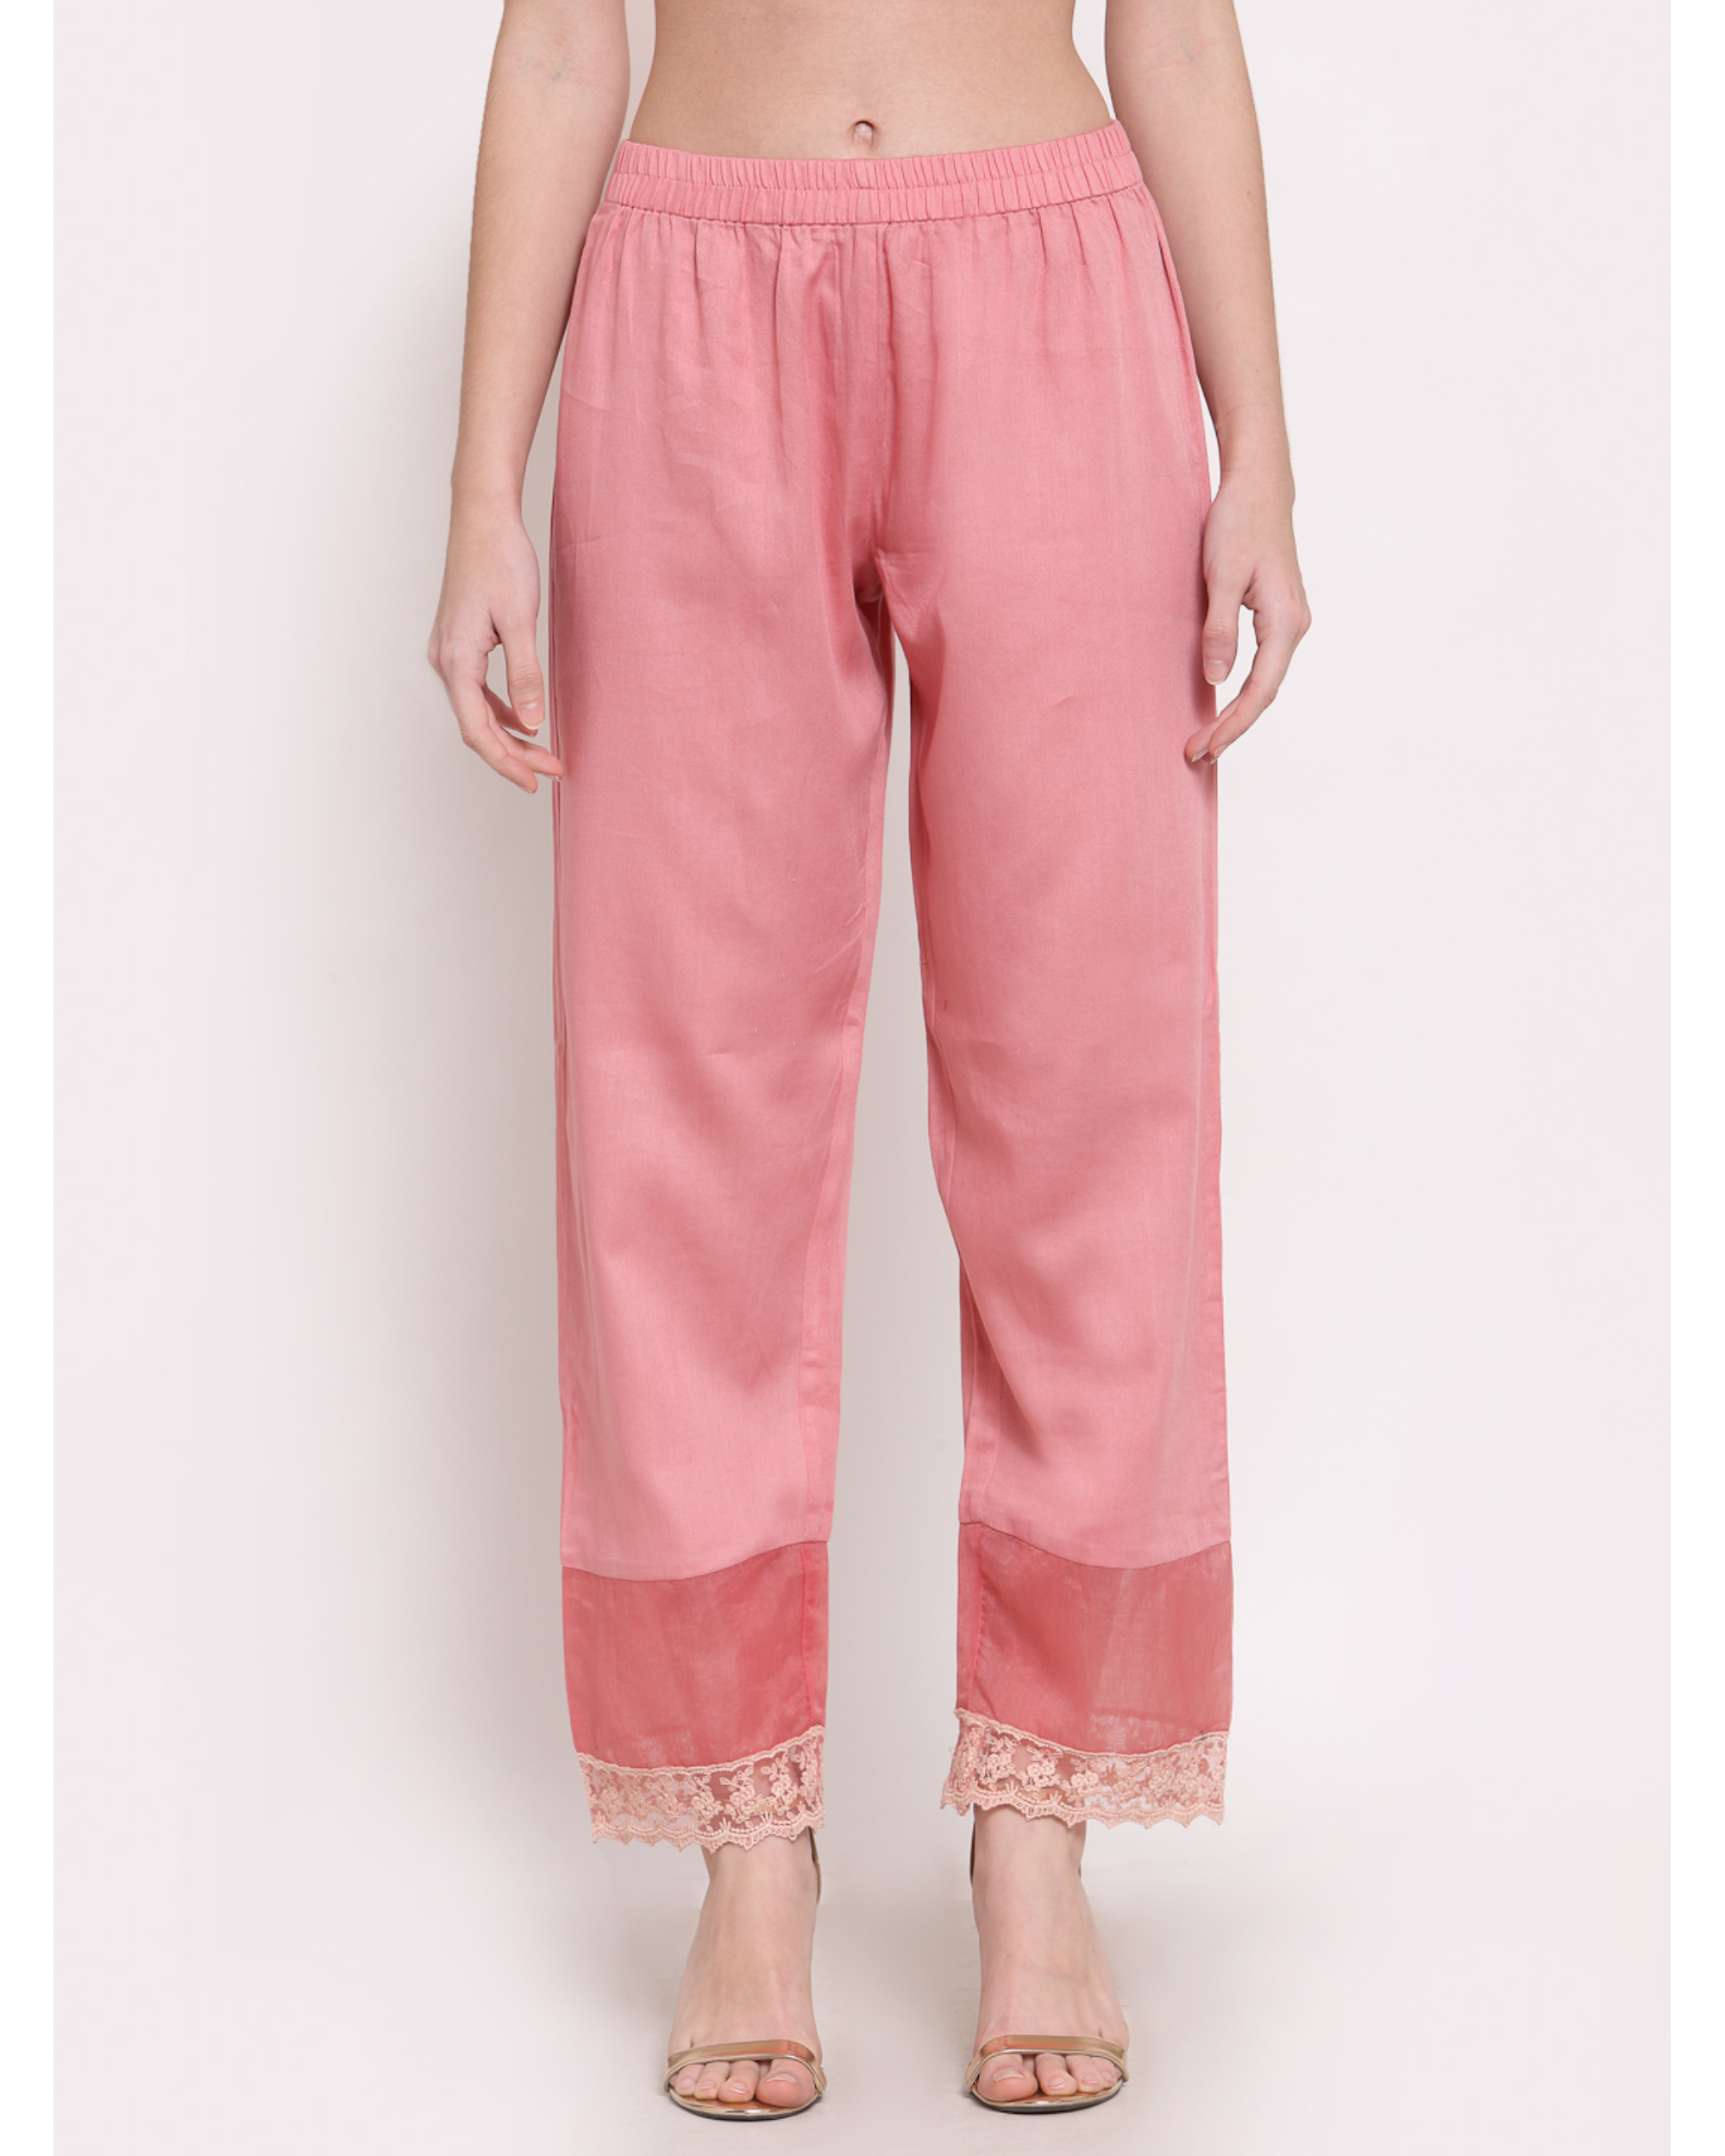 Free Size Palazzo - Buy Peach Palazzo Pants Online In India